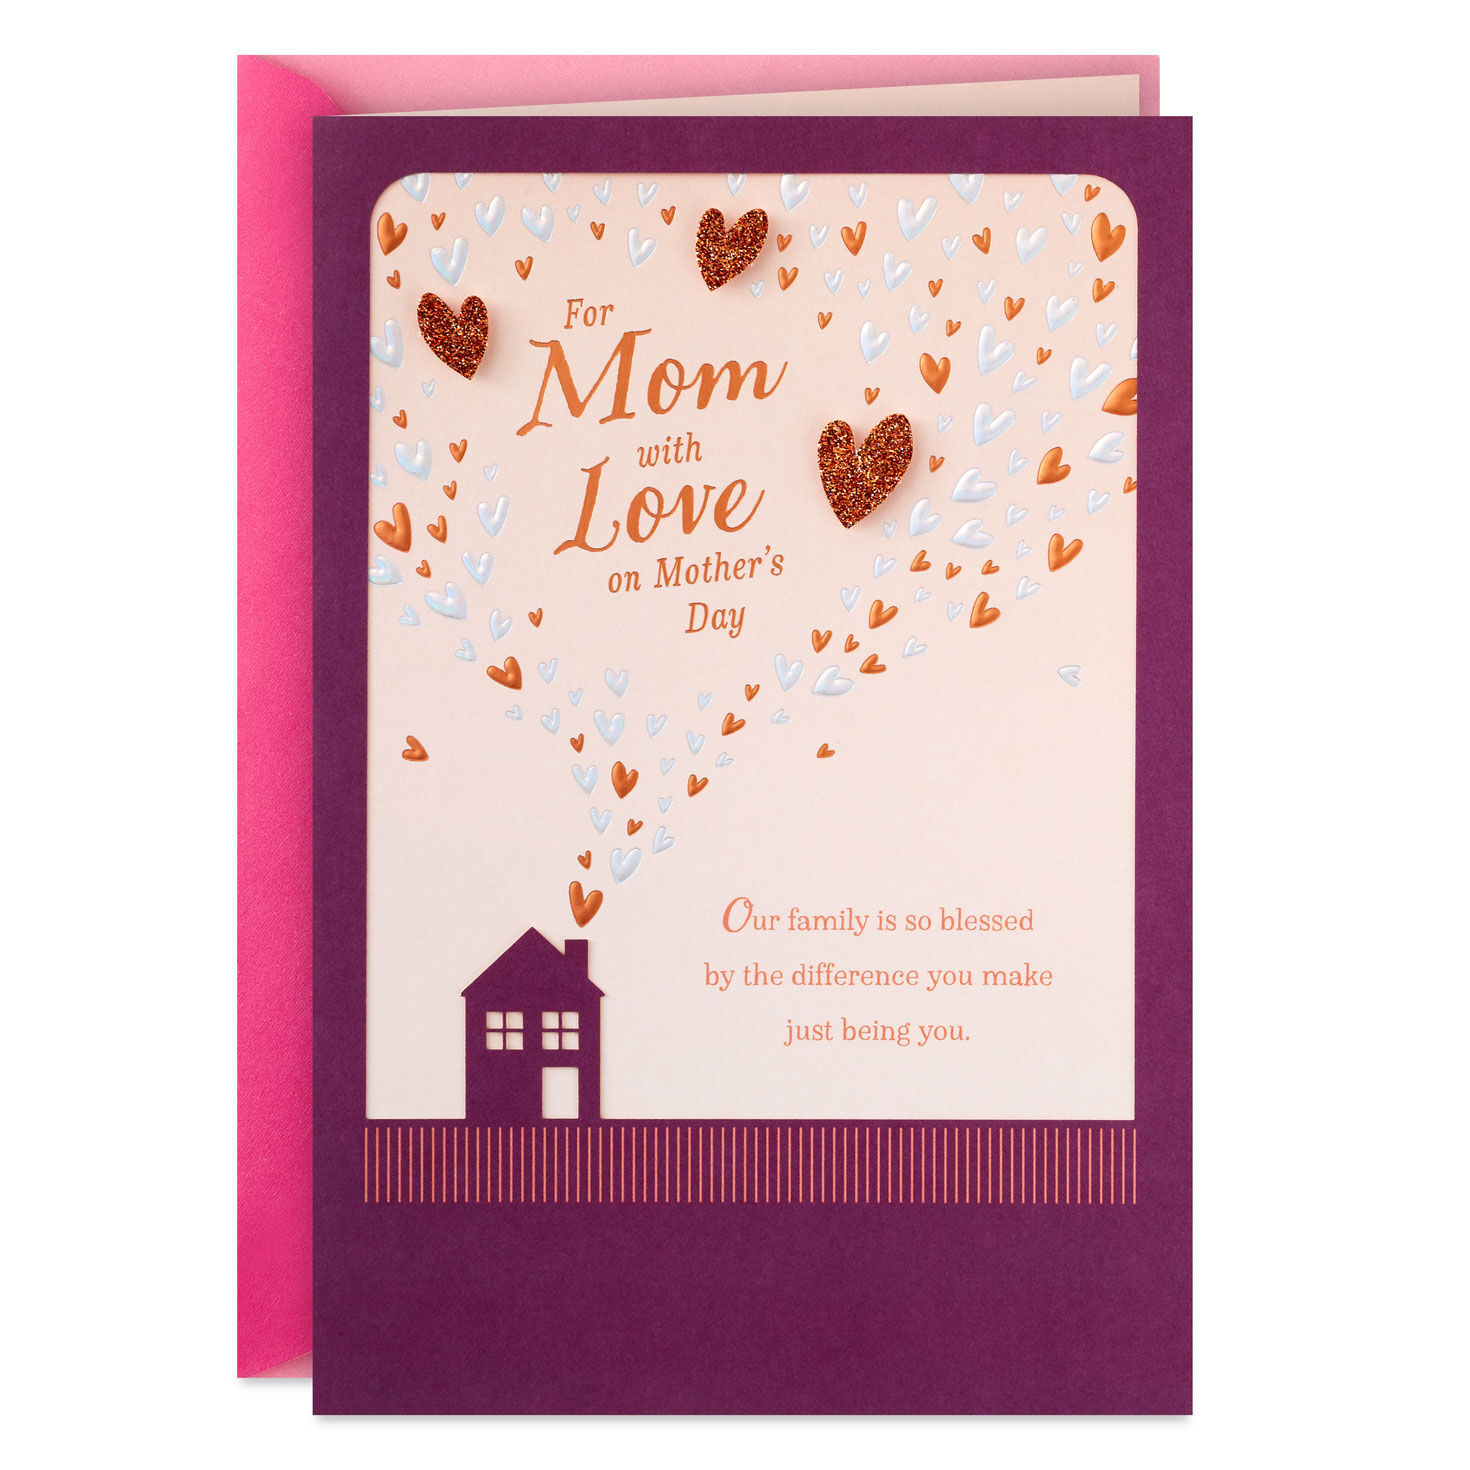 Beautifully Blessed Religious Mother's Day Card for Mom for only USD 6.99 | Hallmark